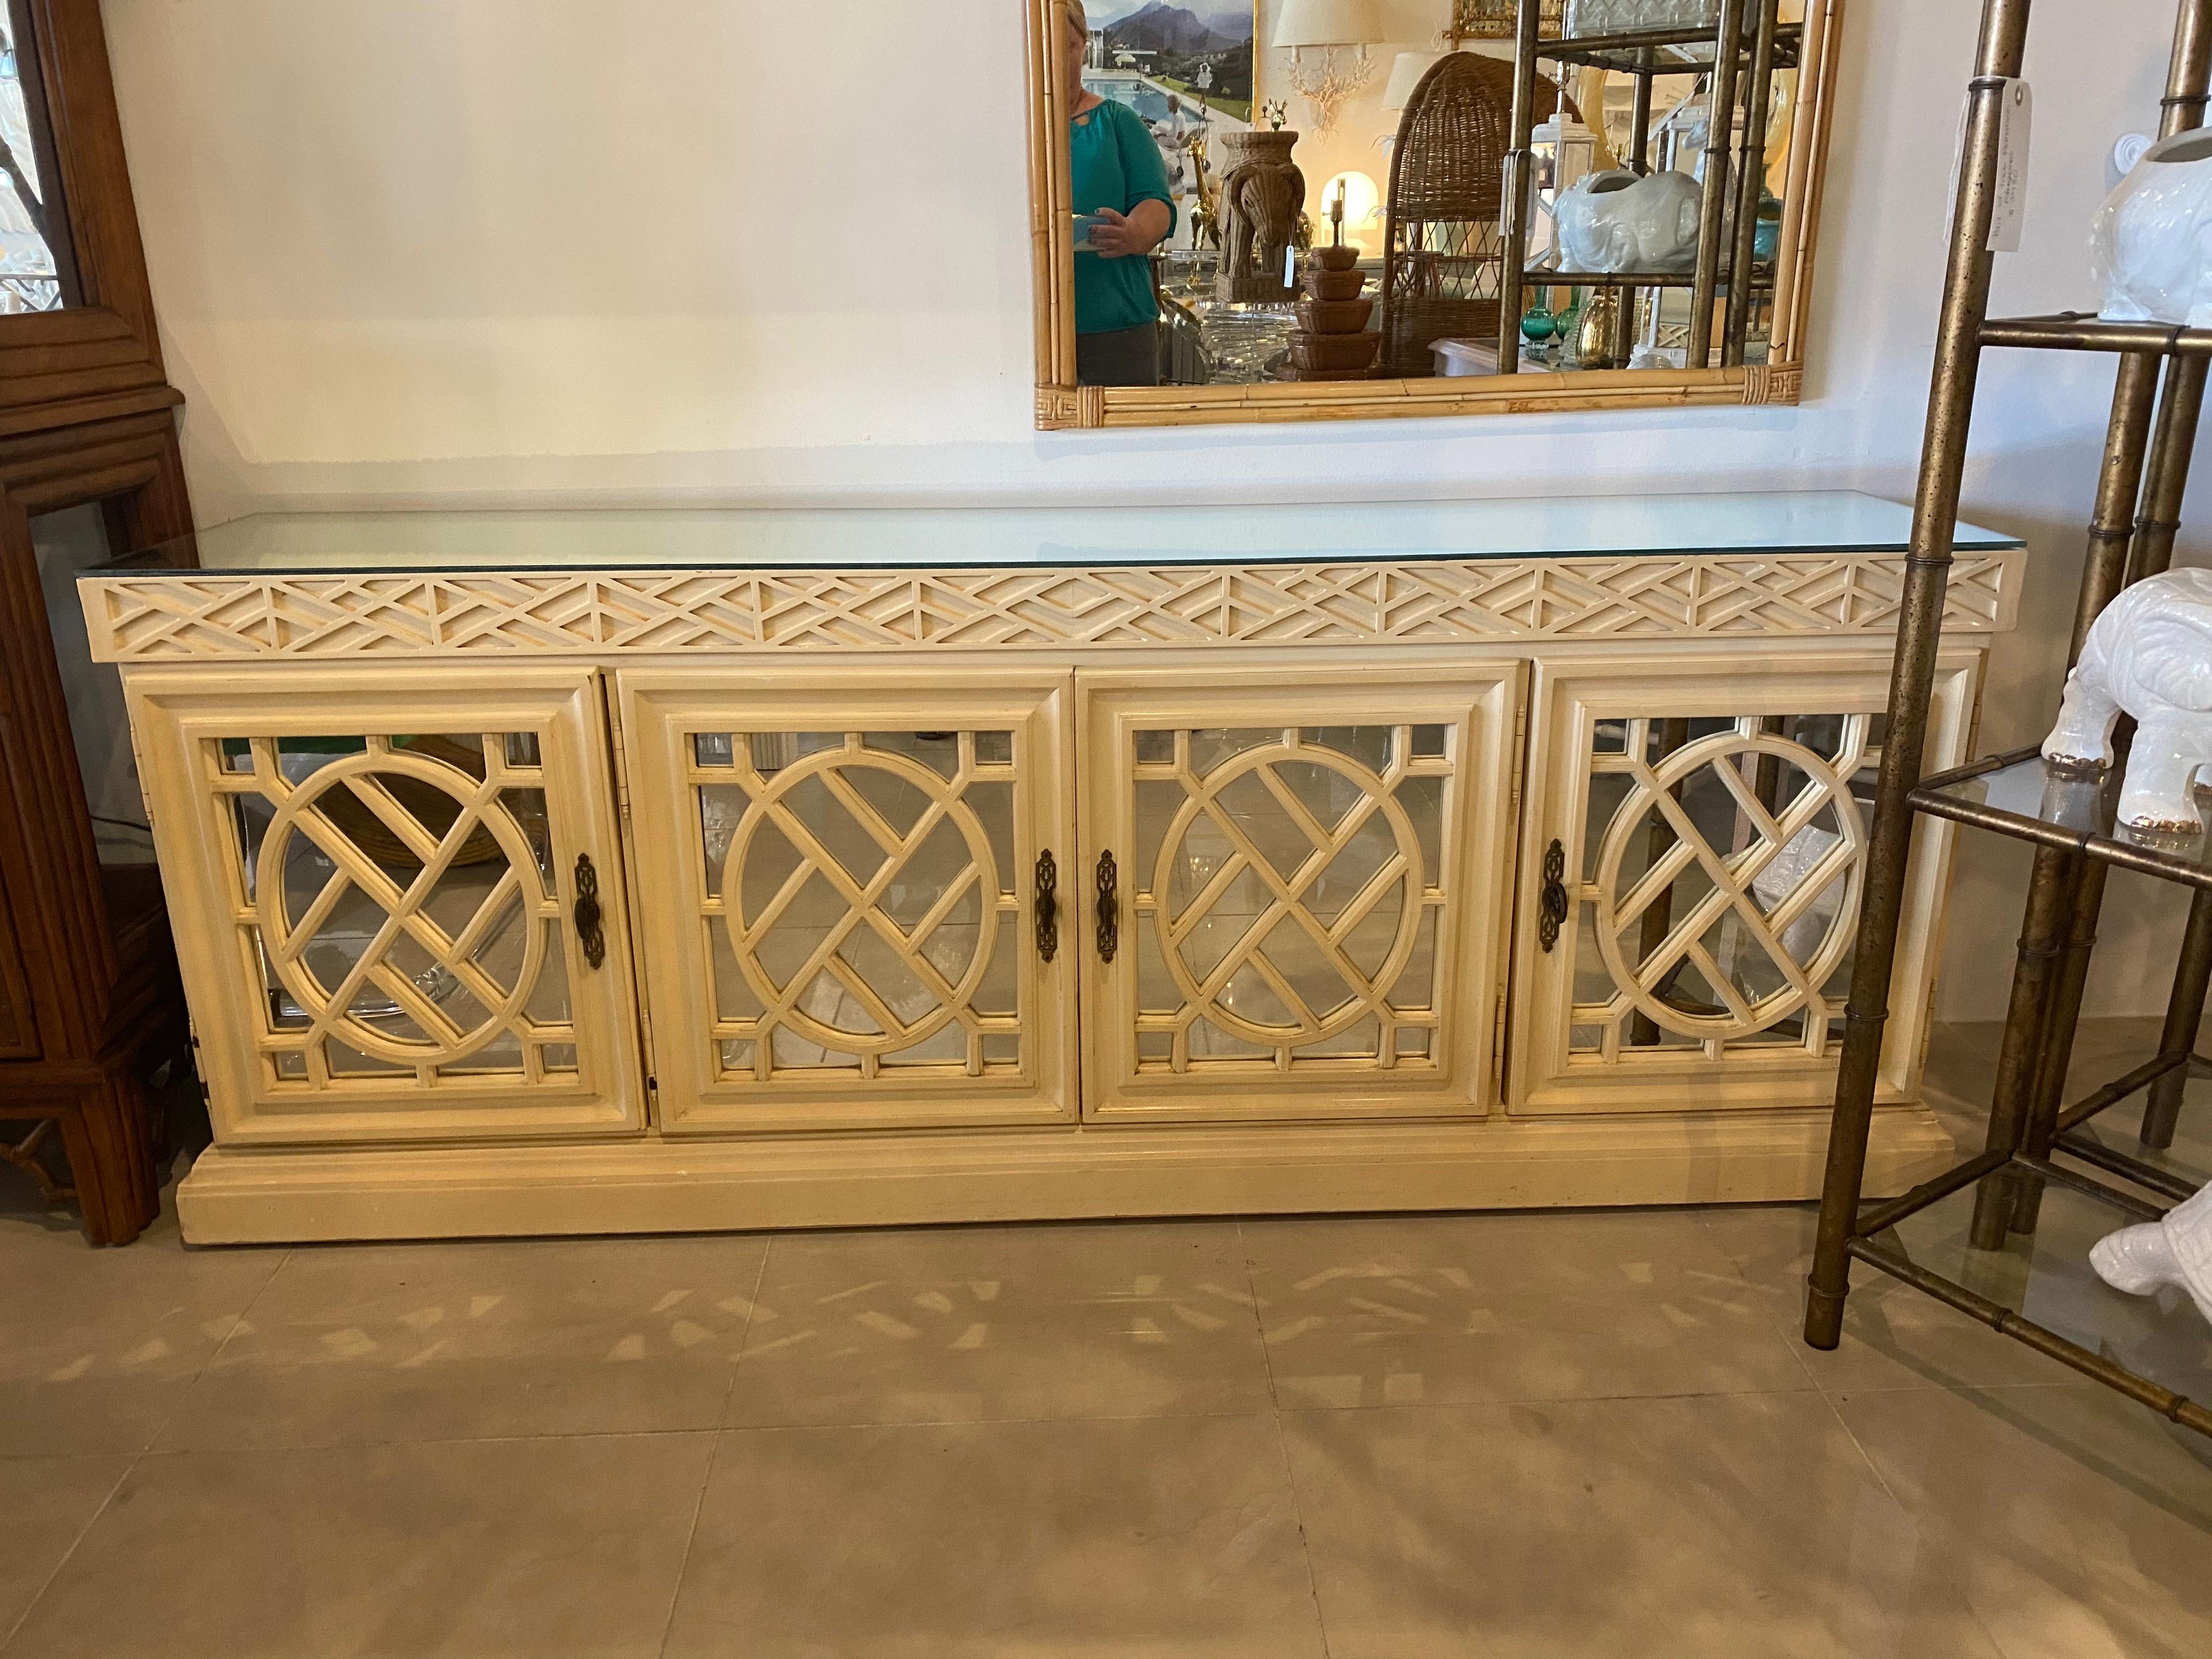 Vintage Fretwork Fret Work Chinese Chippendale Mirrored Credenza Buffet Cabinet 5